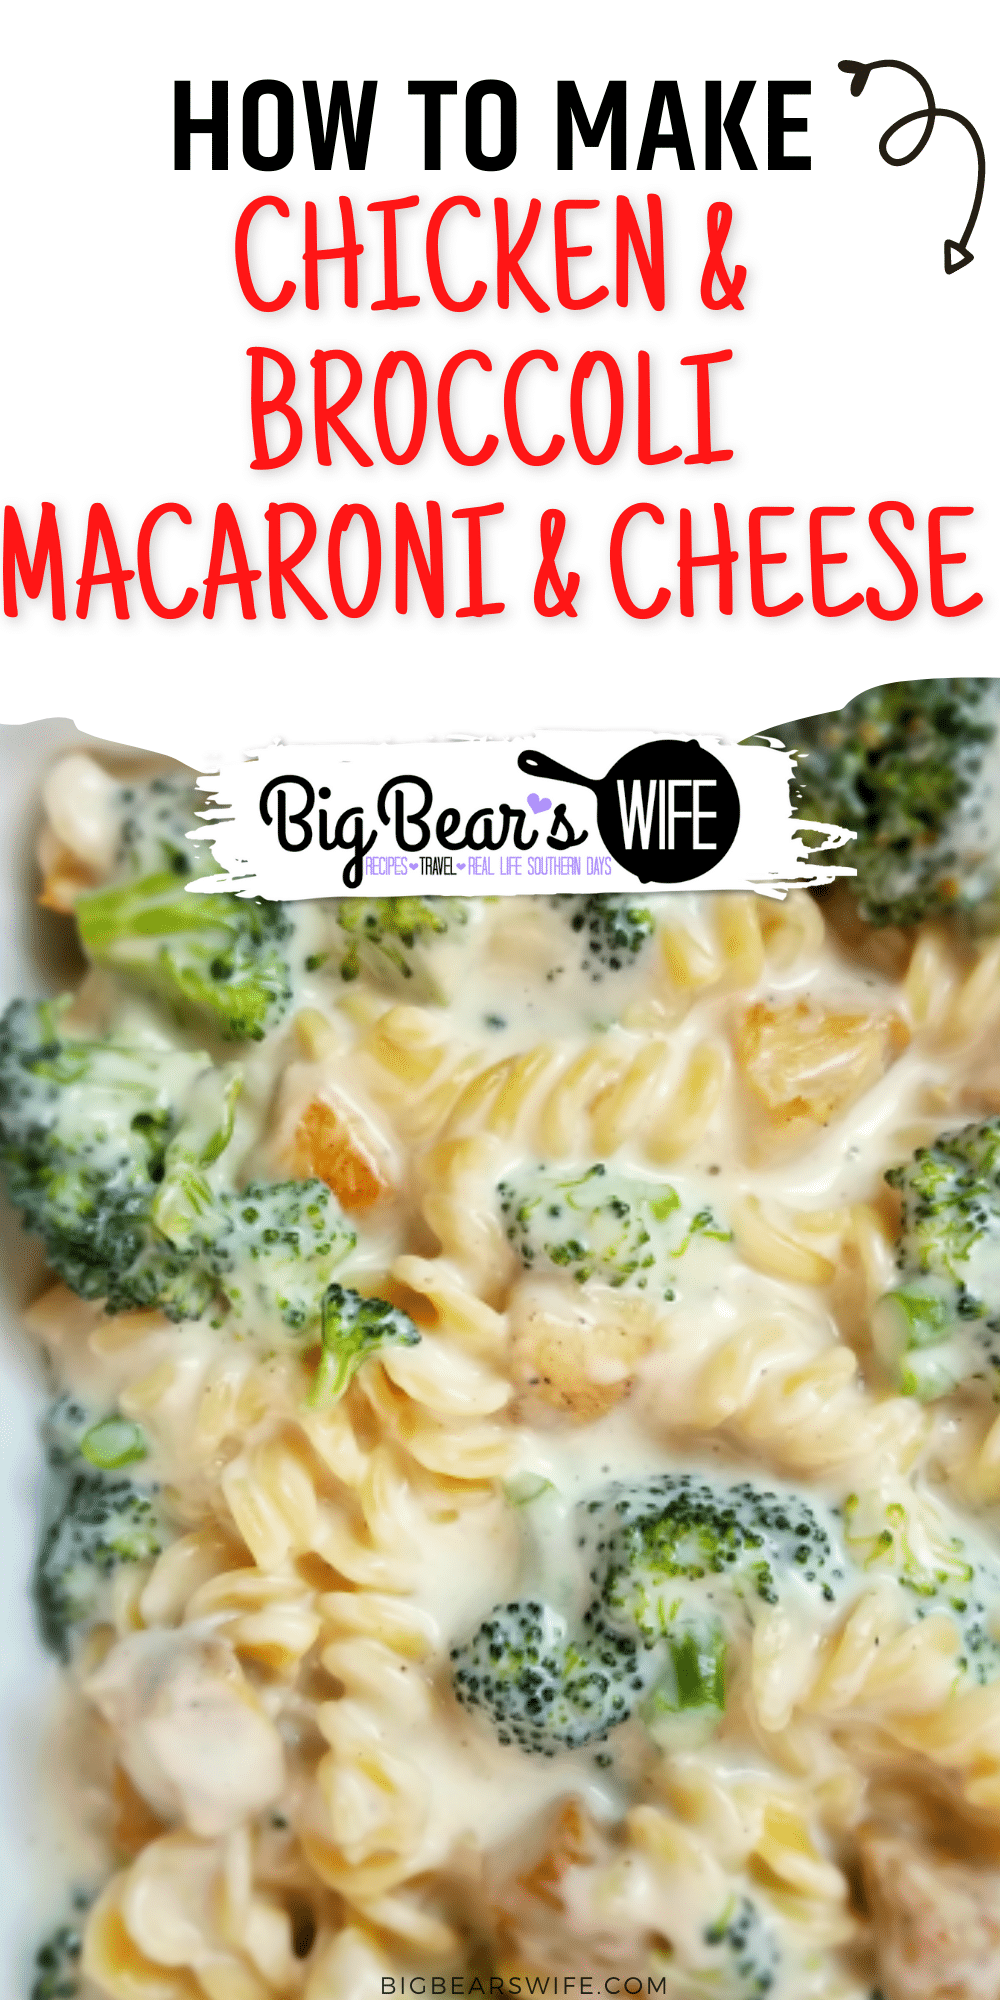  This Macaroni and Cheese turns out to be a complete meal when grilled chicken and steamed broccoli is added to the mix! Chicken and Broccoli Macaroni and Cheese turns a side dish into dinner! via @bigbearswife